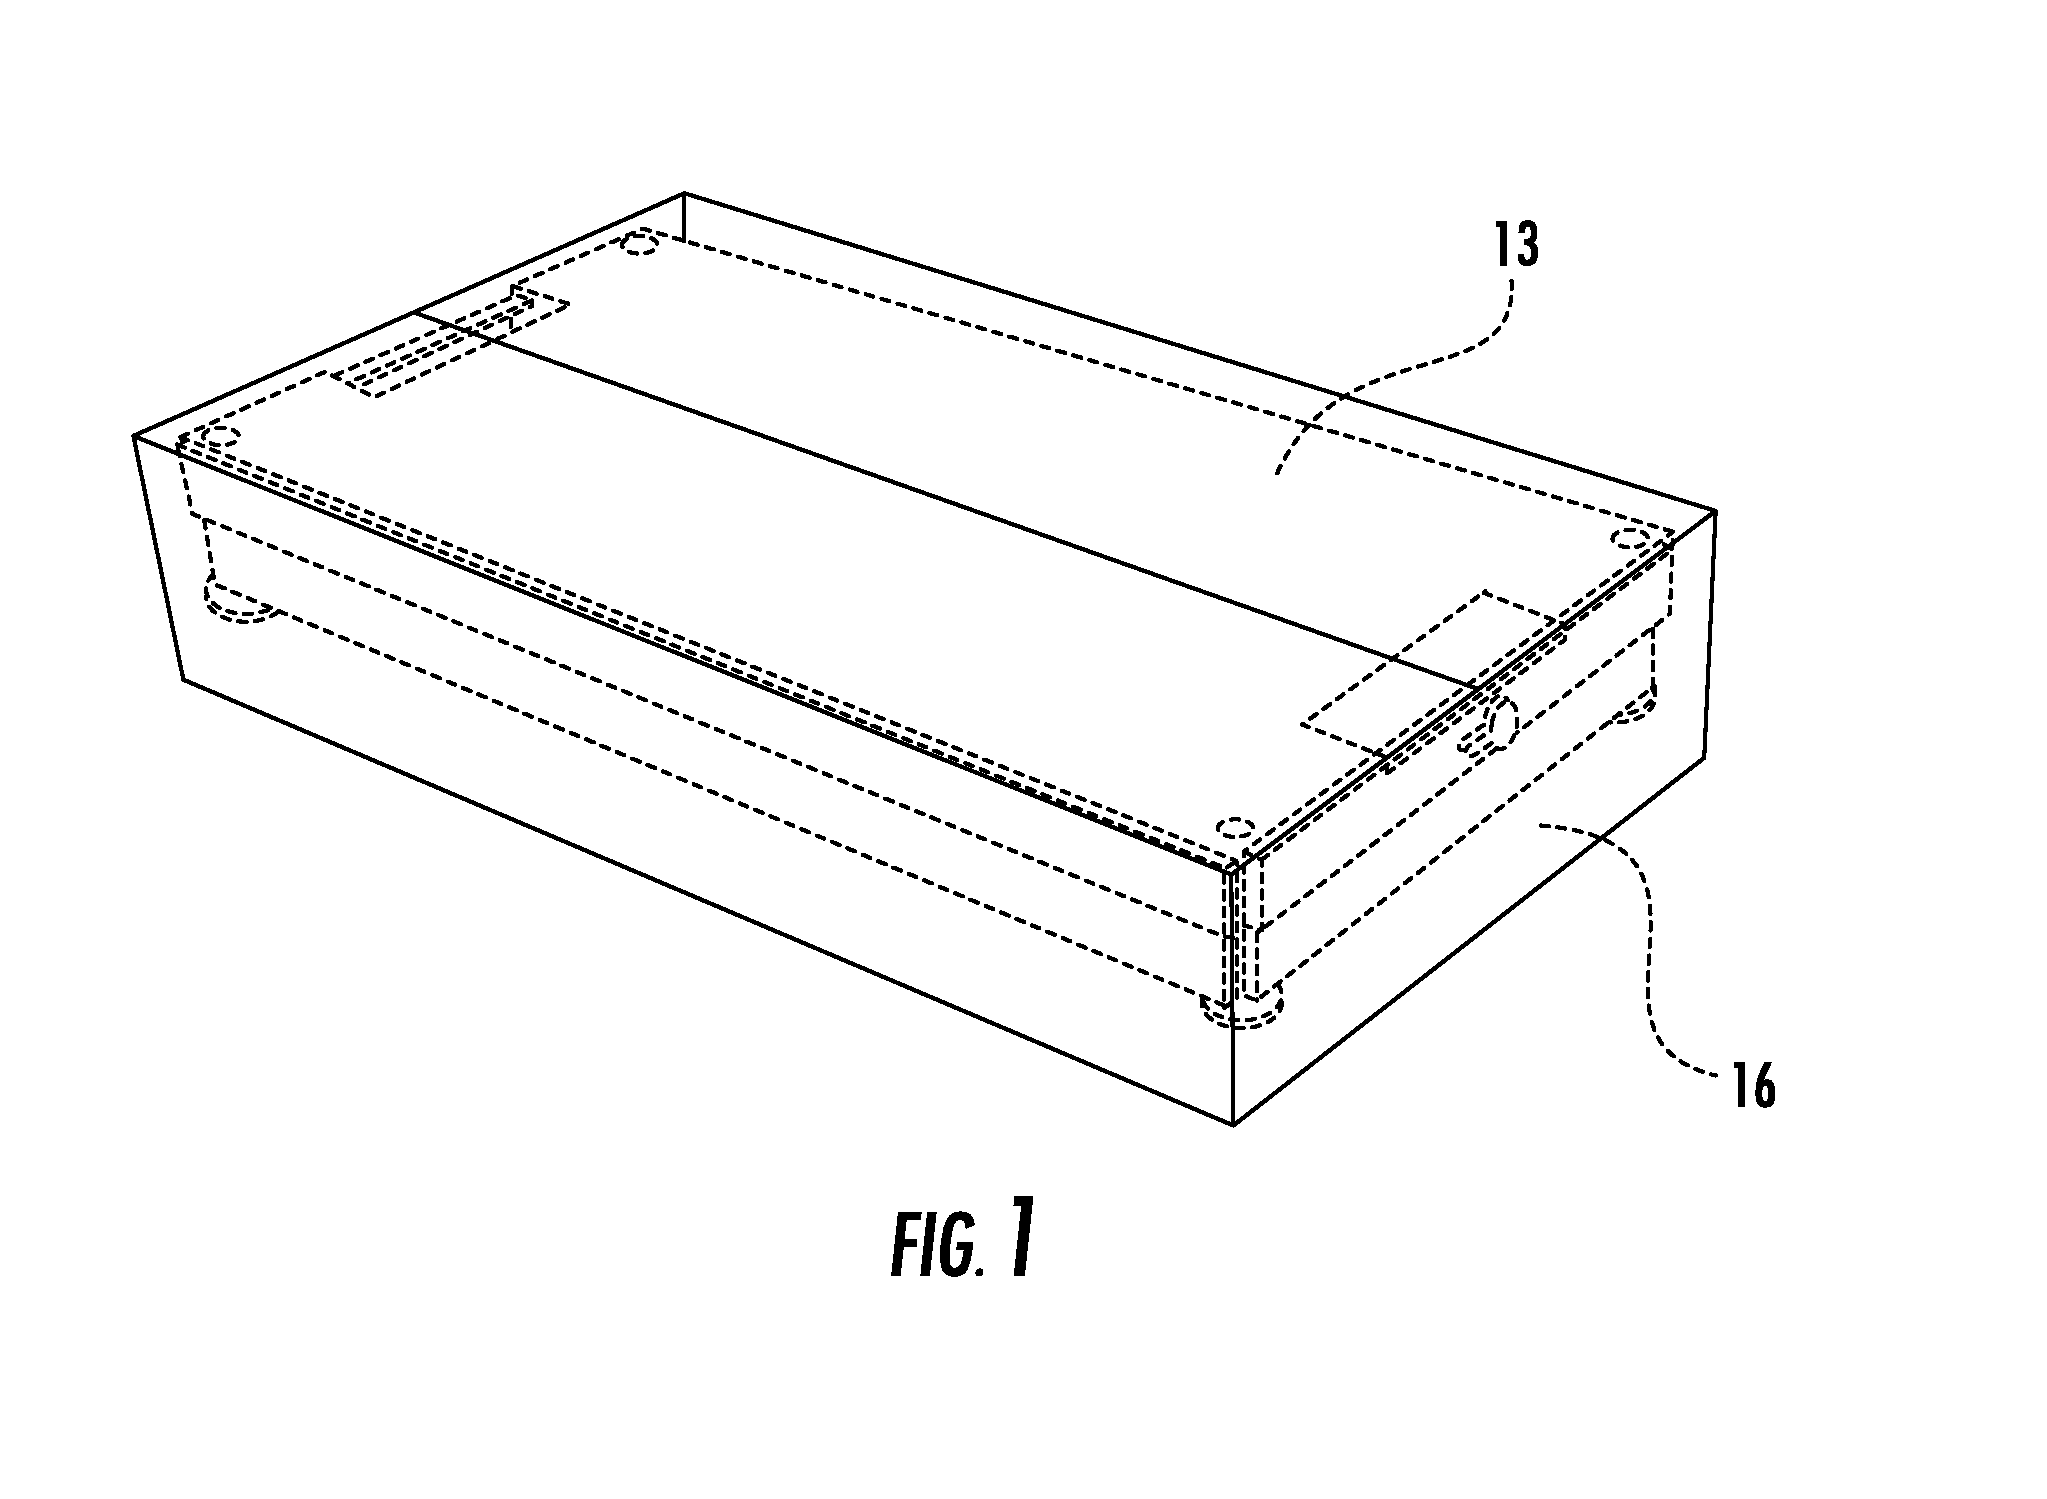 Surgical tray protection system and method